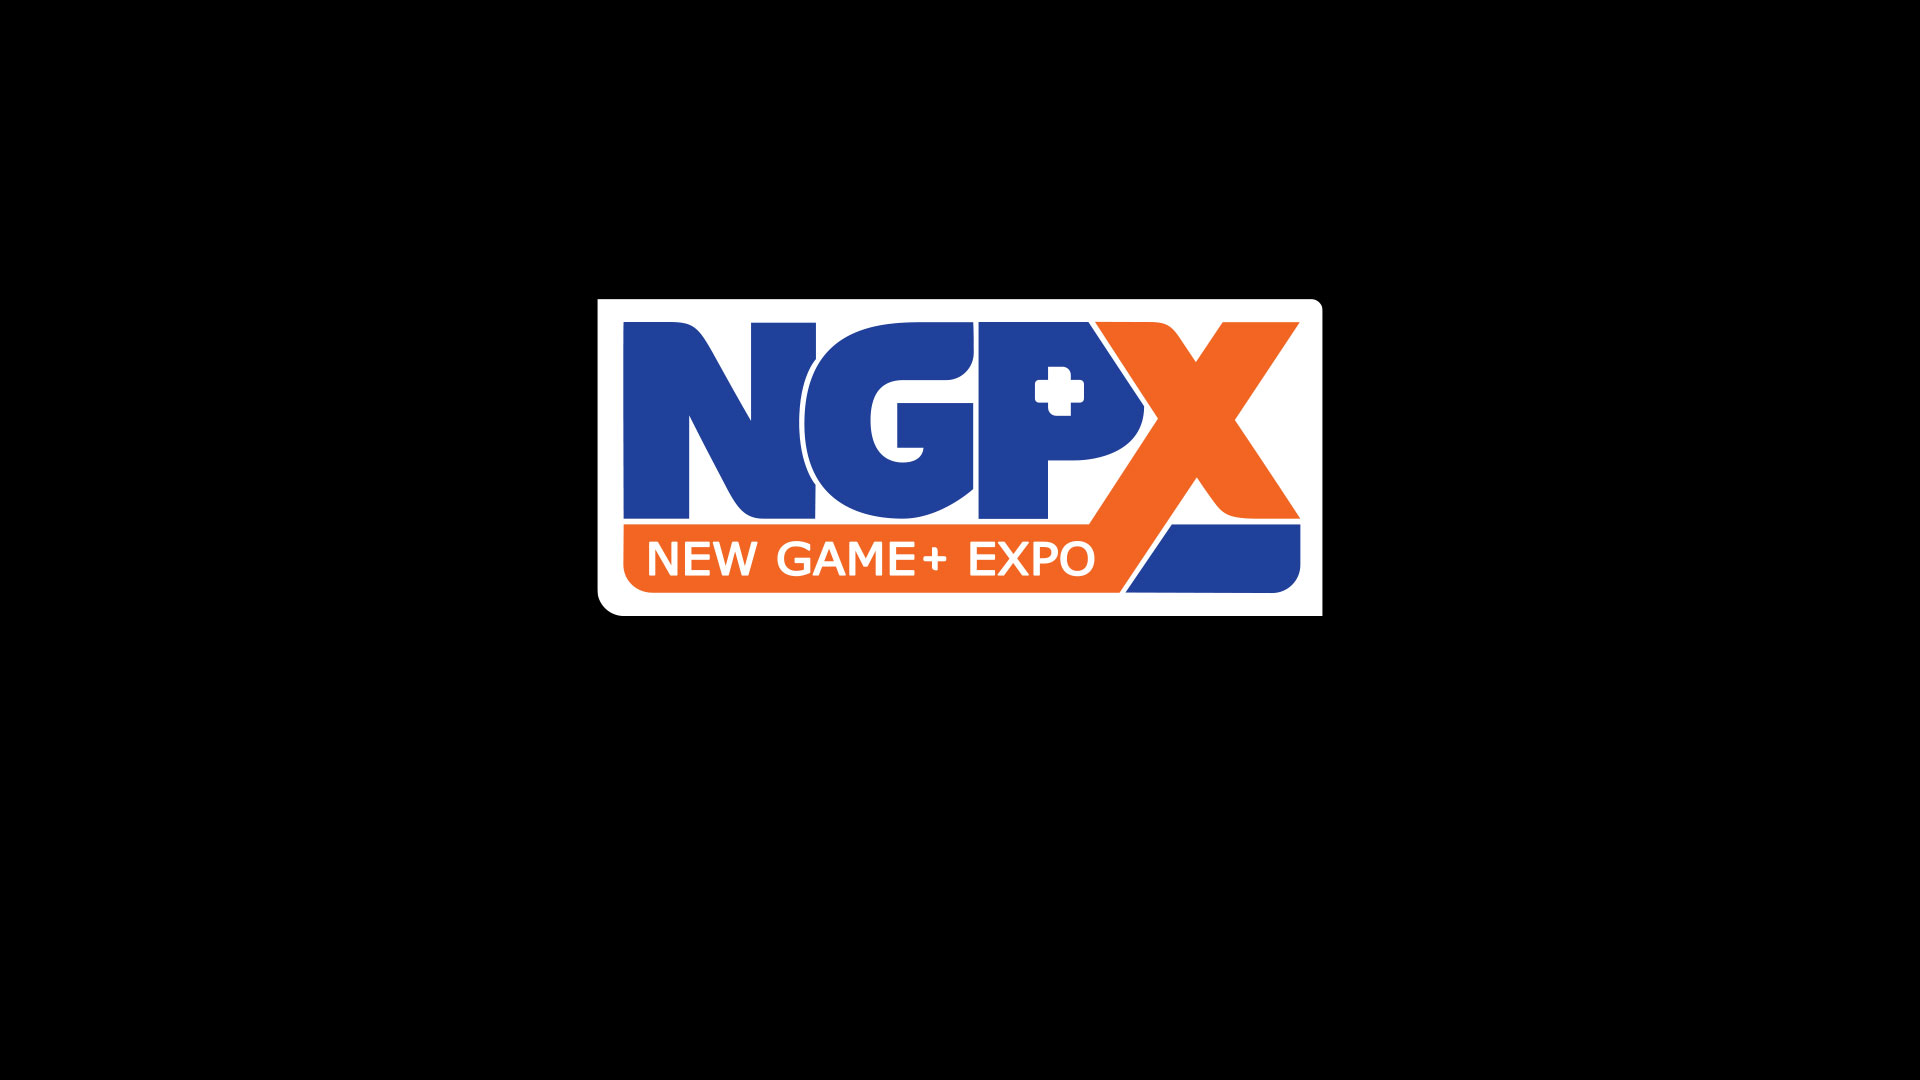 New Game + Expo